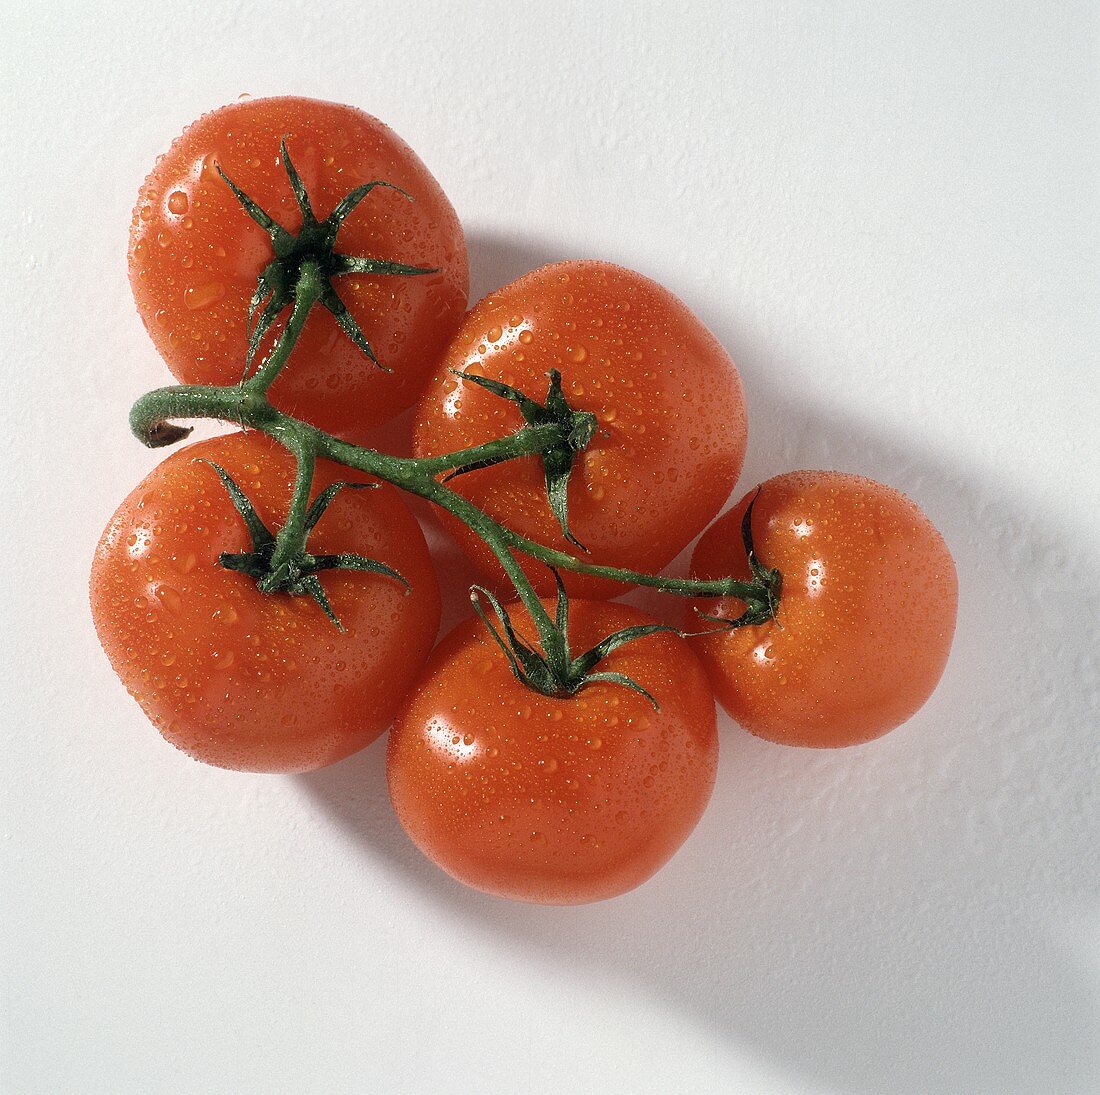 Five tomatoes on the vine with drops of water